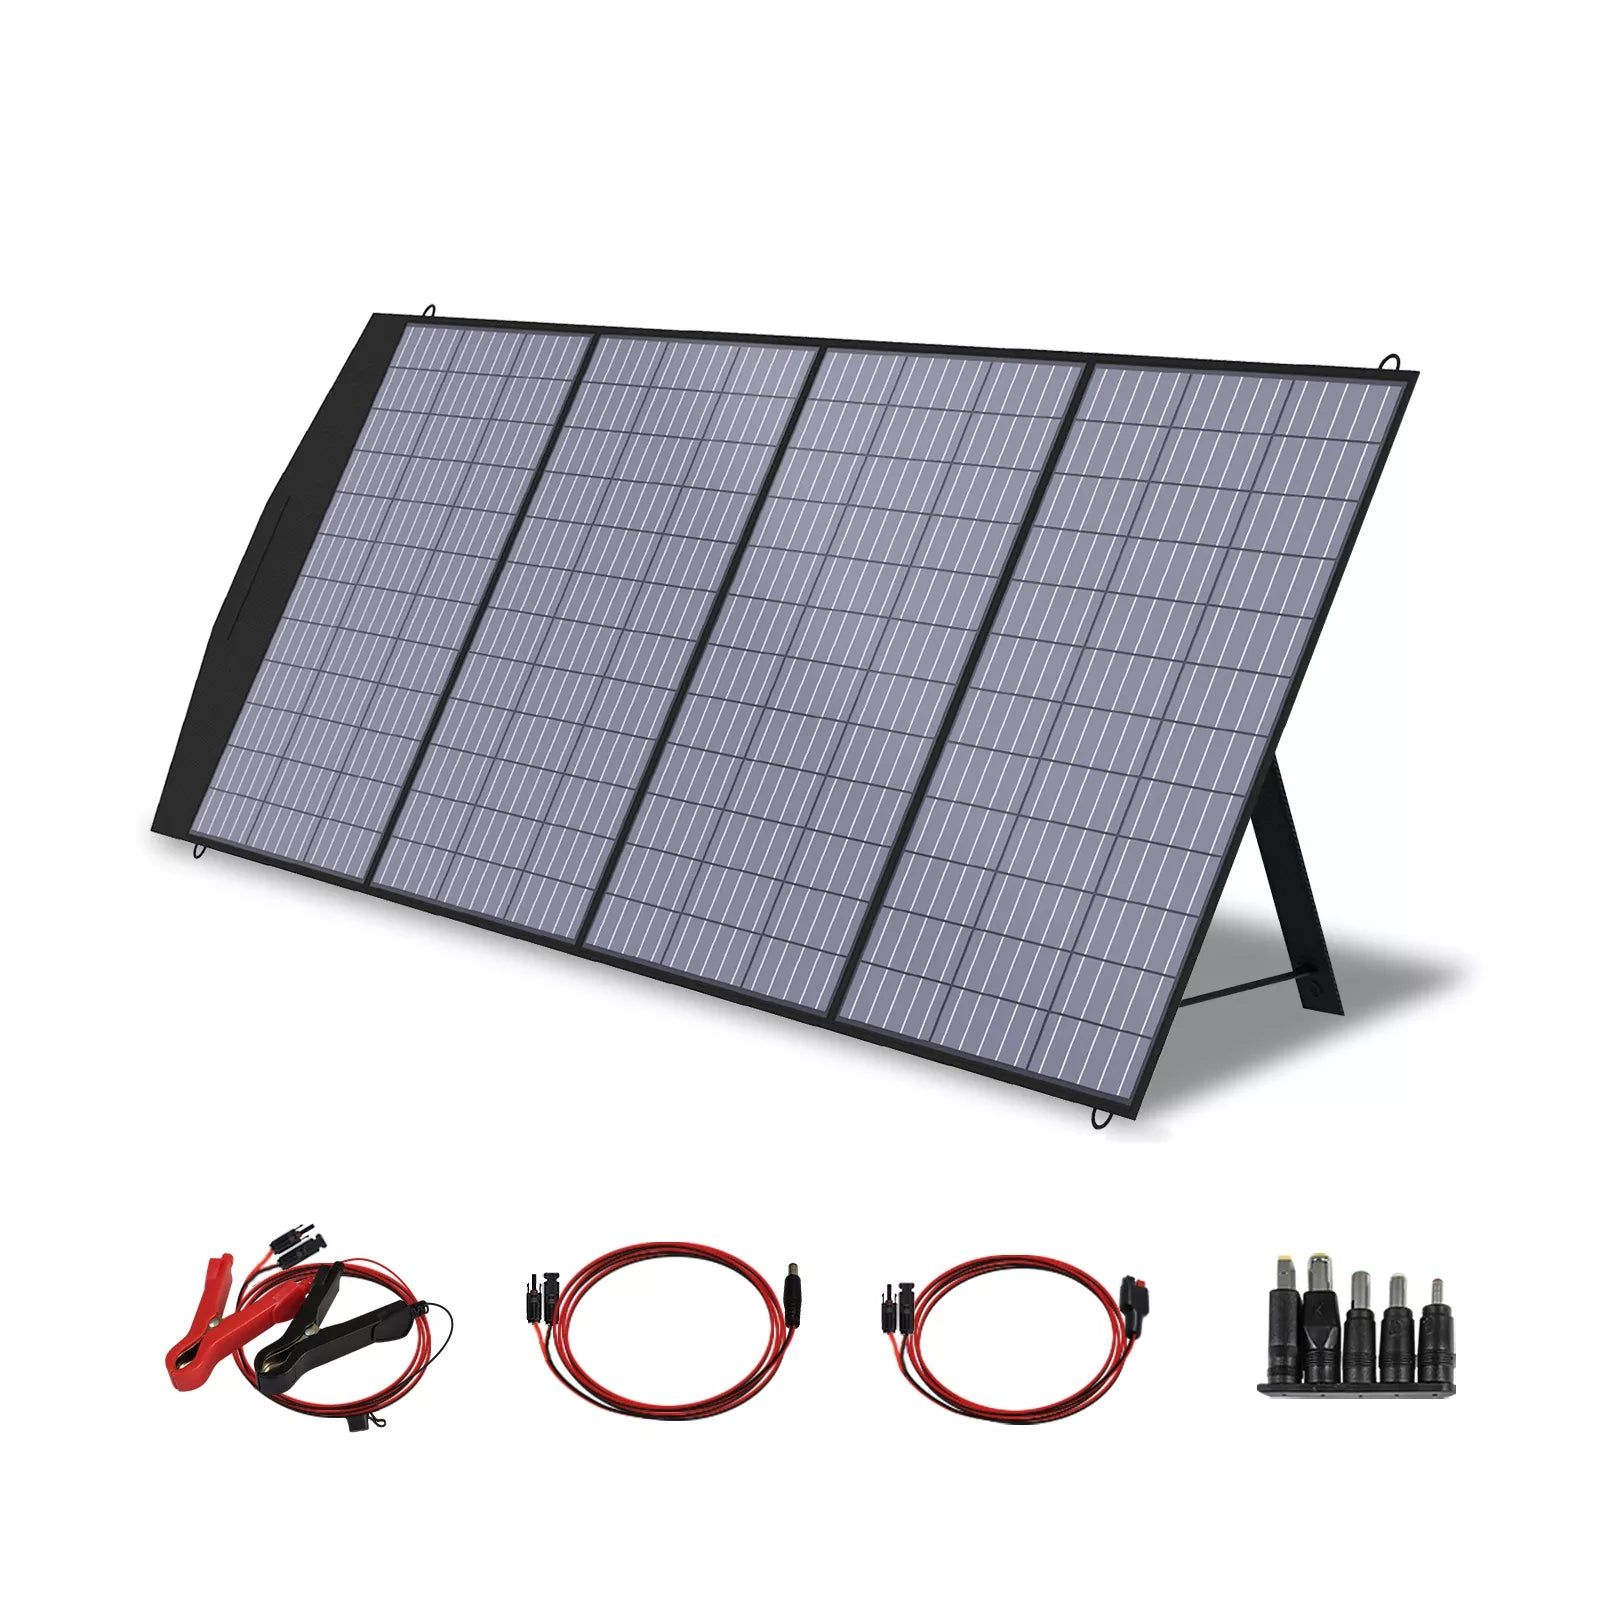 ALLPOWERS Foldable Solar Panel, Portable solar charger for camping/outdoor use with high-power output (up to 20A) for charging devices.